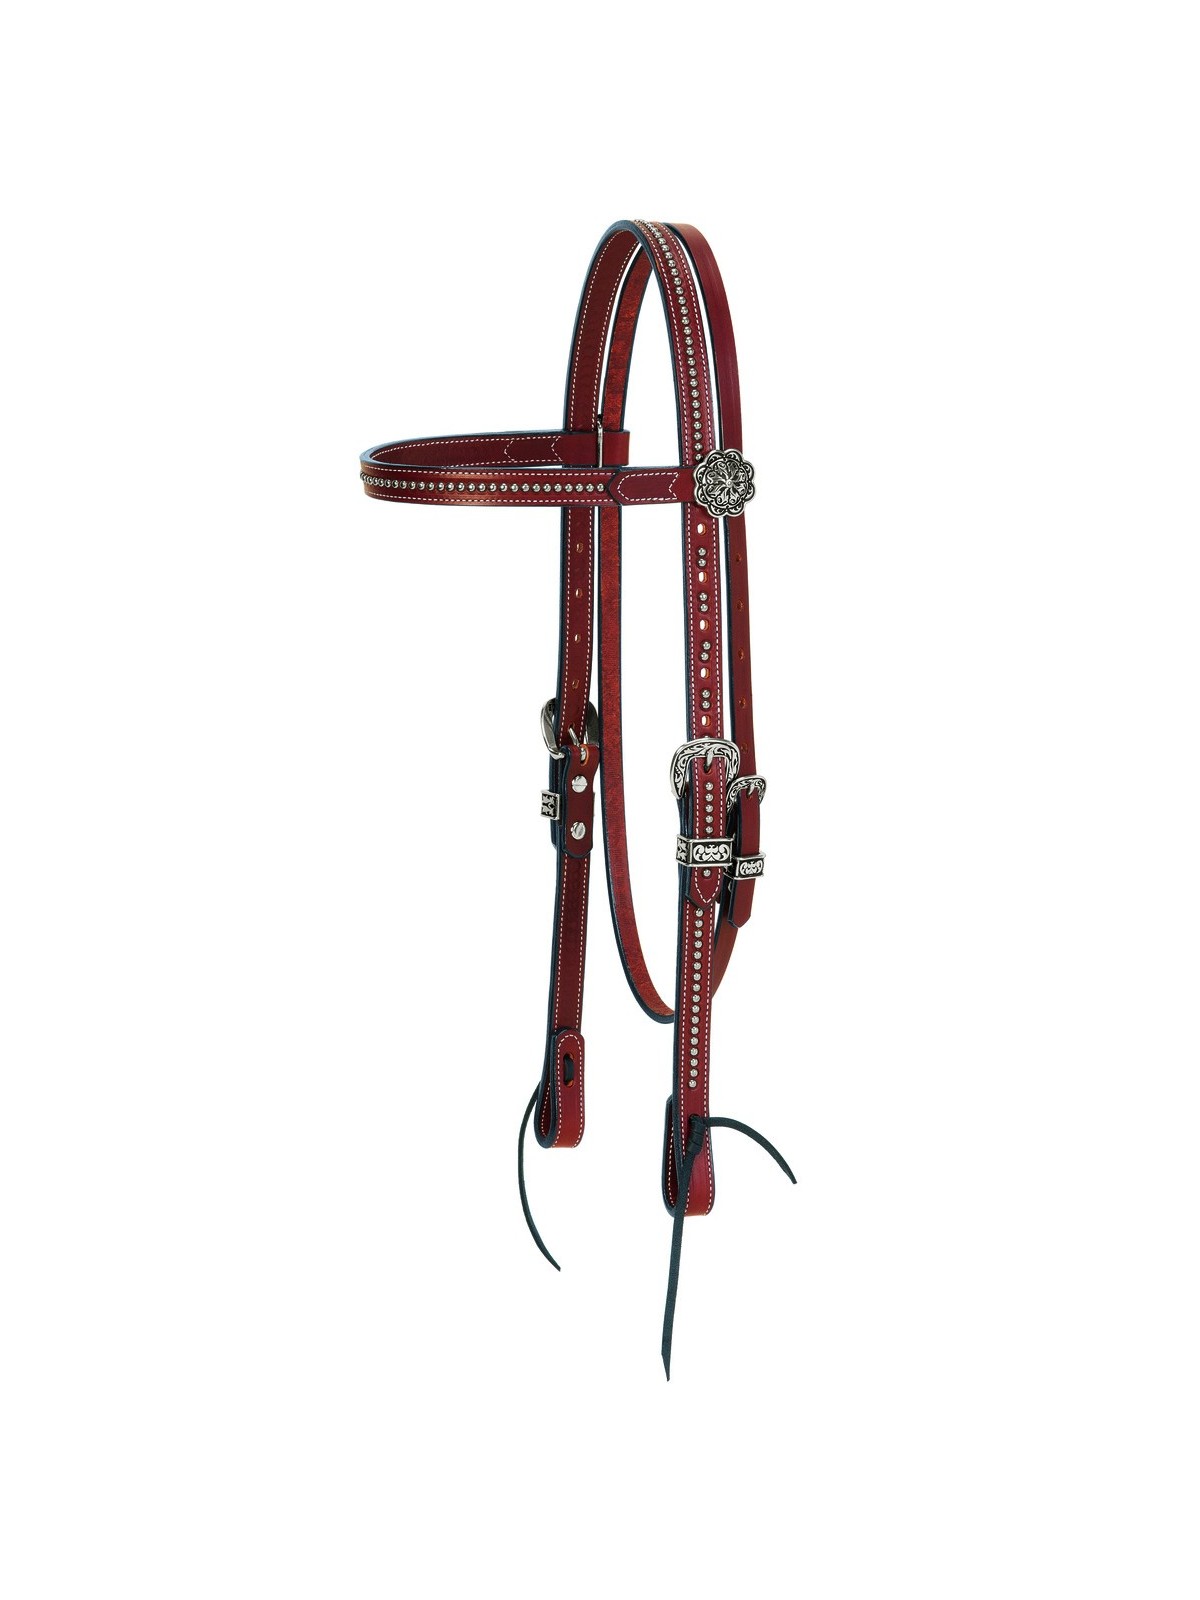 Weaver Leather Austin Browband Headstall 10-0350